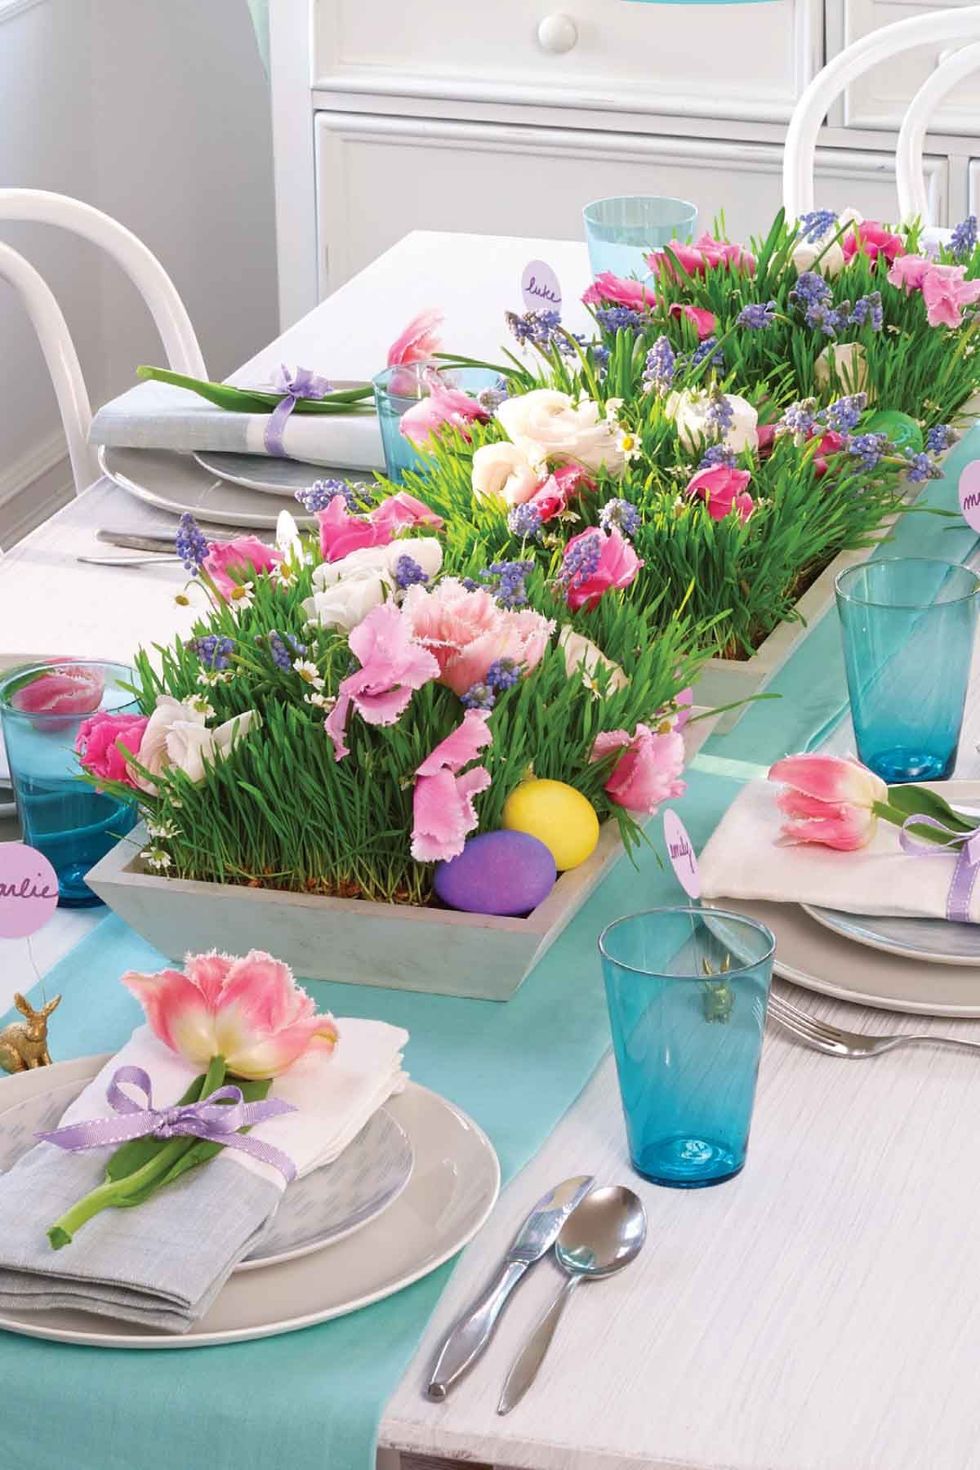 easy easter crafts — grow your own garden centerpiece